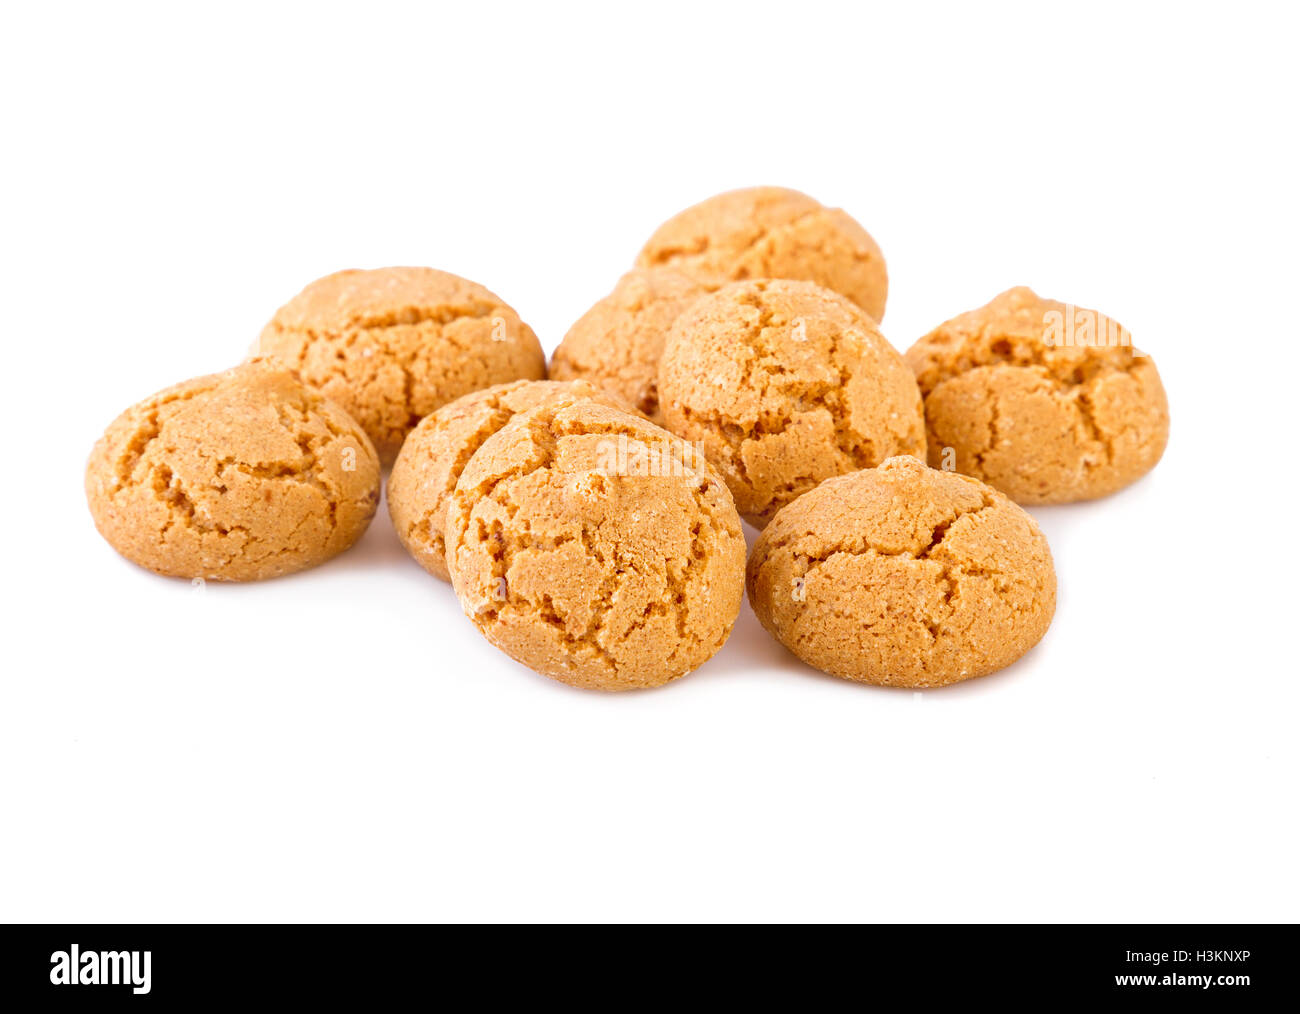 Italian amaretti cookies Cut Out Stock Images & Pictures - Alamy